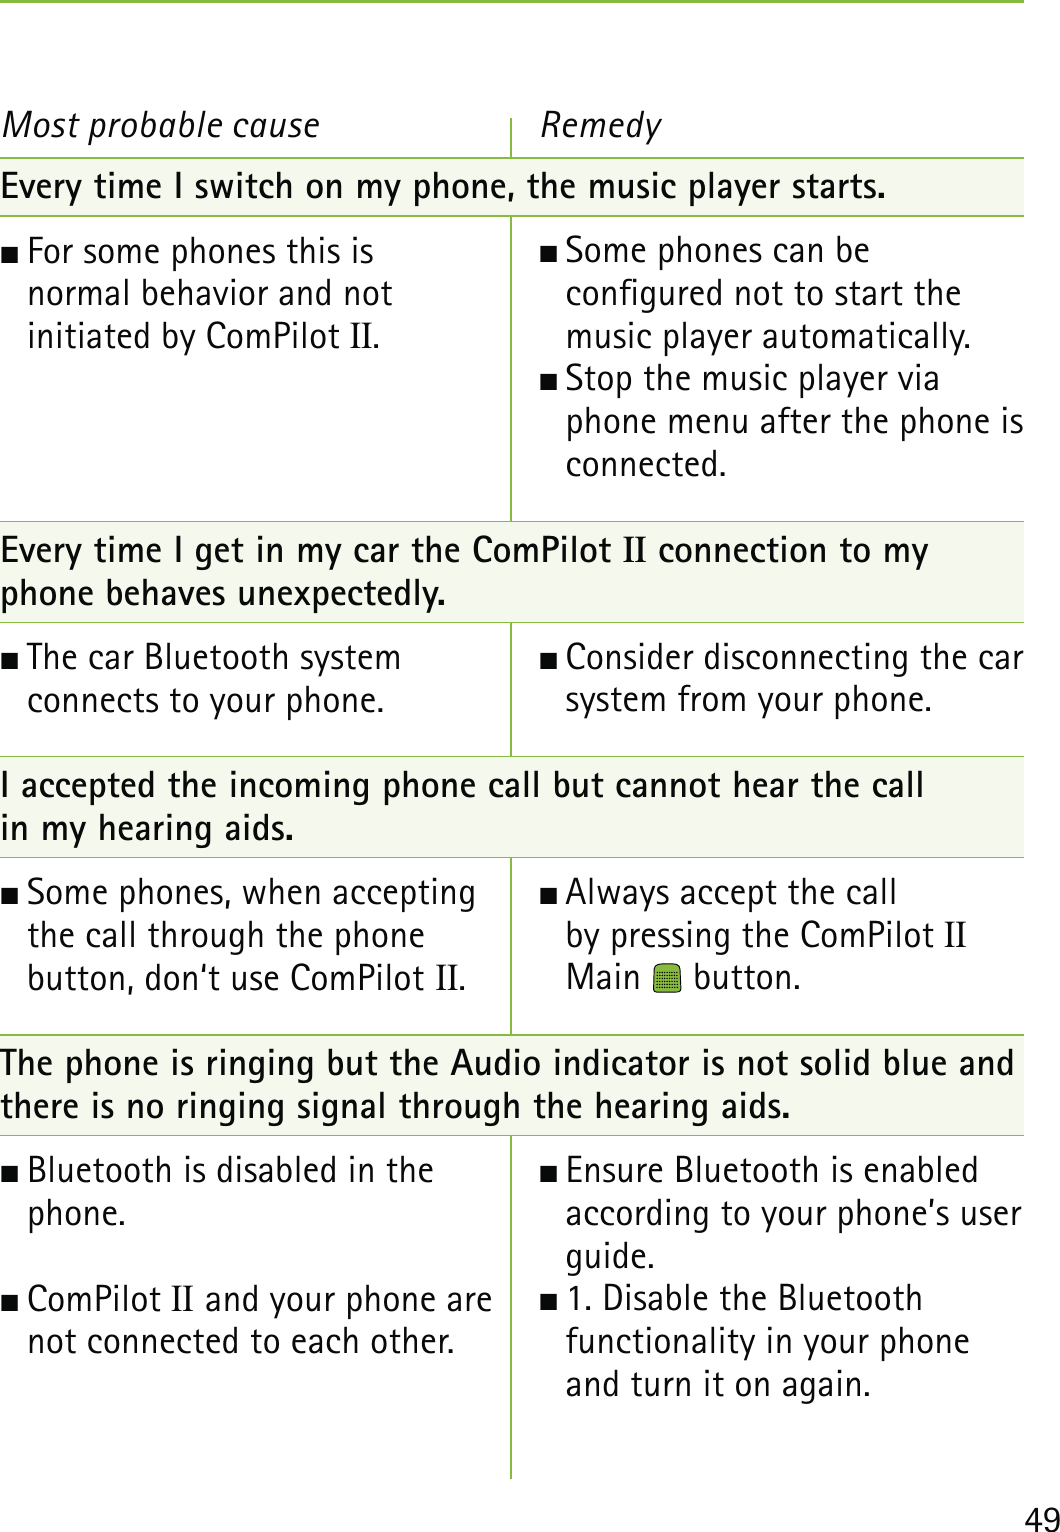 49Most probable cause RemedyEvery time I switch on my phone, the music player starts. For some phones this is  normal behavior and not  initiated by ComPilot II.Every time I get in my car the ComPilot II connection to my phone behaves unexpectedly. The car Bluetooth system  connects to your phone. I accepted the incoming phone call but cannot hear the call  in my hearing aids. Some phones, when accepting  the call through the phone  button, don‘t use ComPilot II.  The phone is ringing but the Audio indicator is not solid blue and there is no ringing signal through the hearing aids. Bluetooth is disabled in the phone. ComPilot II and your phone are  not connected to each other. Some phones can be  congured not to start the music player automatically.  Stop the music player via phone menu after the phone is connected. Consider disconnecting the car system from your phone. Always accept the call  by pressing the ComPilot II Main   button. Ensure Bluetooth is enabled according to your phone’s user guide. 1. Disable the Bluetooth  functionality in your phone and turn it on again.